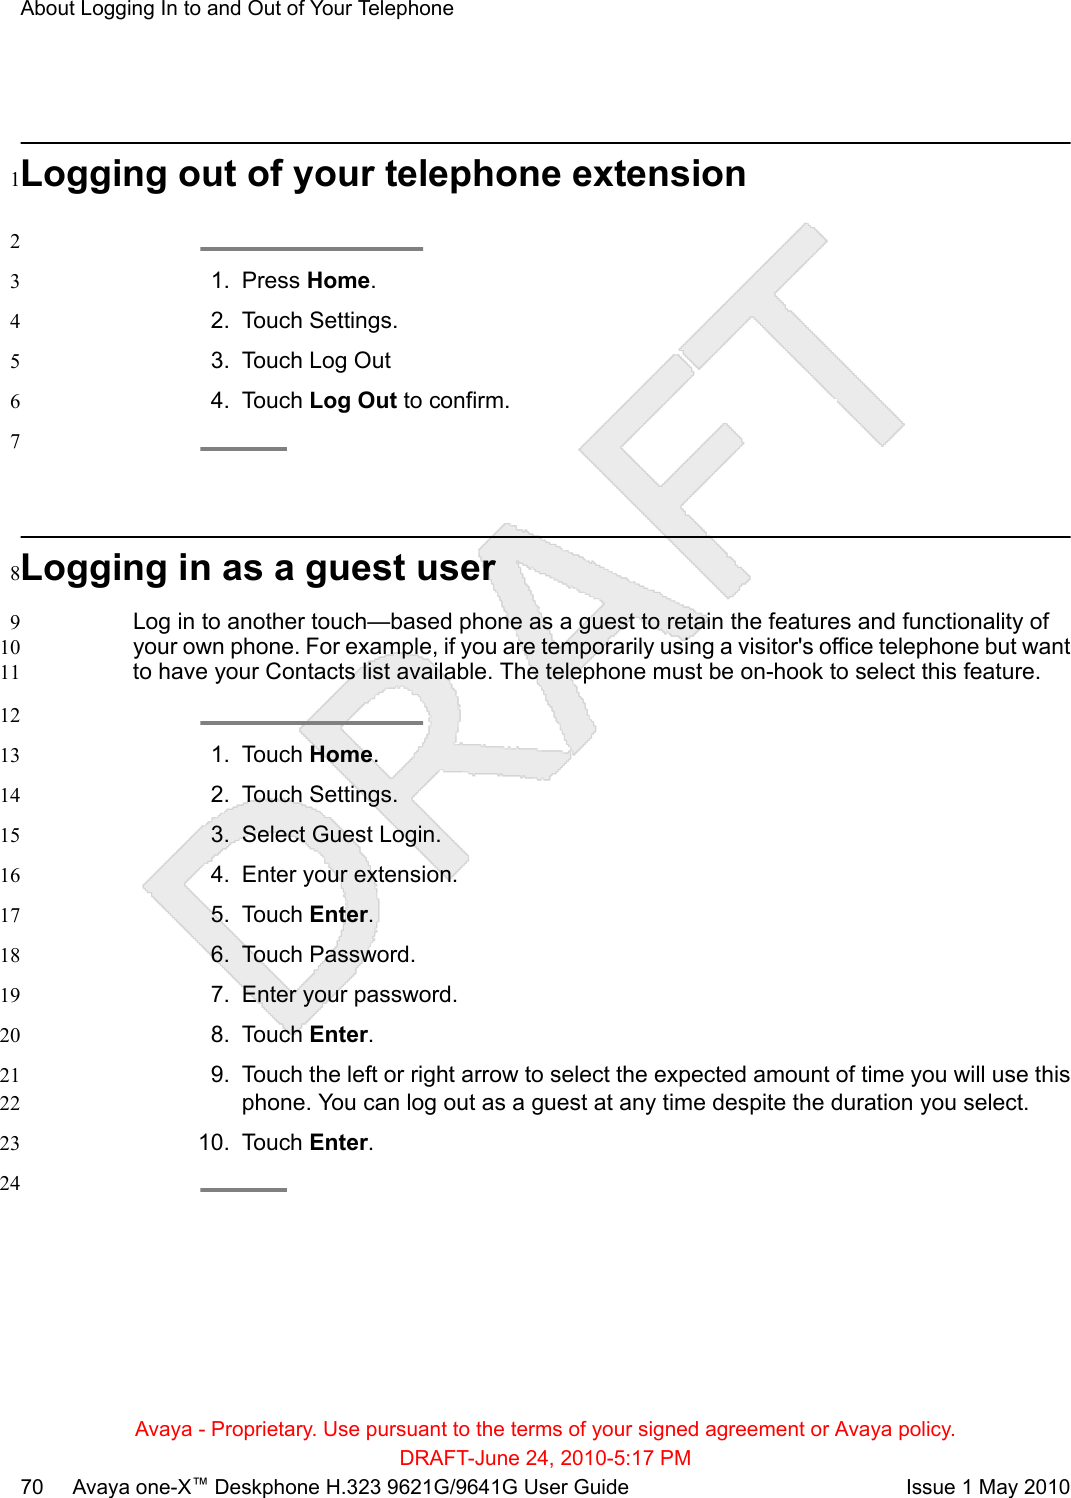 Logging out of your telephone extension121. Press Home.32. Touch Settings.43. Touch Log Out54. Touch Log Out to confirm.67Logging in as a guest user8Log in to another touch—based phone as a guest to retain the features and functionality of9your own phone. For example, if you are temporarily using a visitor&apos;s office telephone but want10to have your Contacts list available. The telephone must be on-hook to select this feature.11121. Touch Home.132. Touch Settings.143. Select Guest Login.154. Enter your extension.165. Touch Enter.176. Touch Password.187. Enter your password.198. Touch Enter.209. Touch the left or right arrow to select the expected amount of time you will use this21phone. You can log out as a guest at any time despite the duration you select.2210. Touch Enter.2324About Logging In to and Out of Your TelephoneAvaya - Proprietary. Use pursuant to the terms of your signed agreement or Avaya policy.DRAFT-June 24, 2010-5:17 PM70     Avaya one-X™ Deskphone H.323 9621G/9641G User Guide Issue 1 May 2010